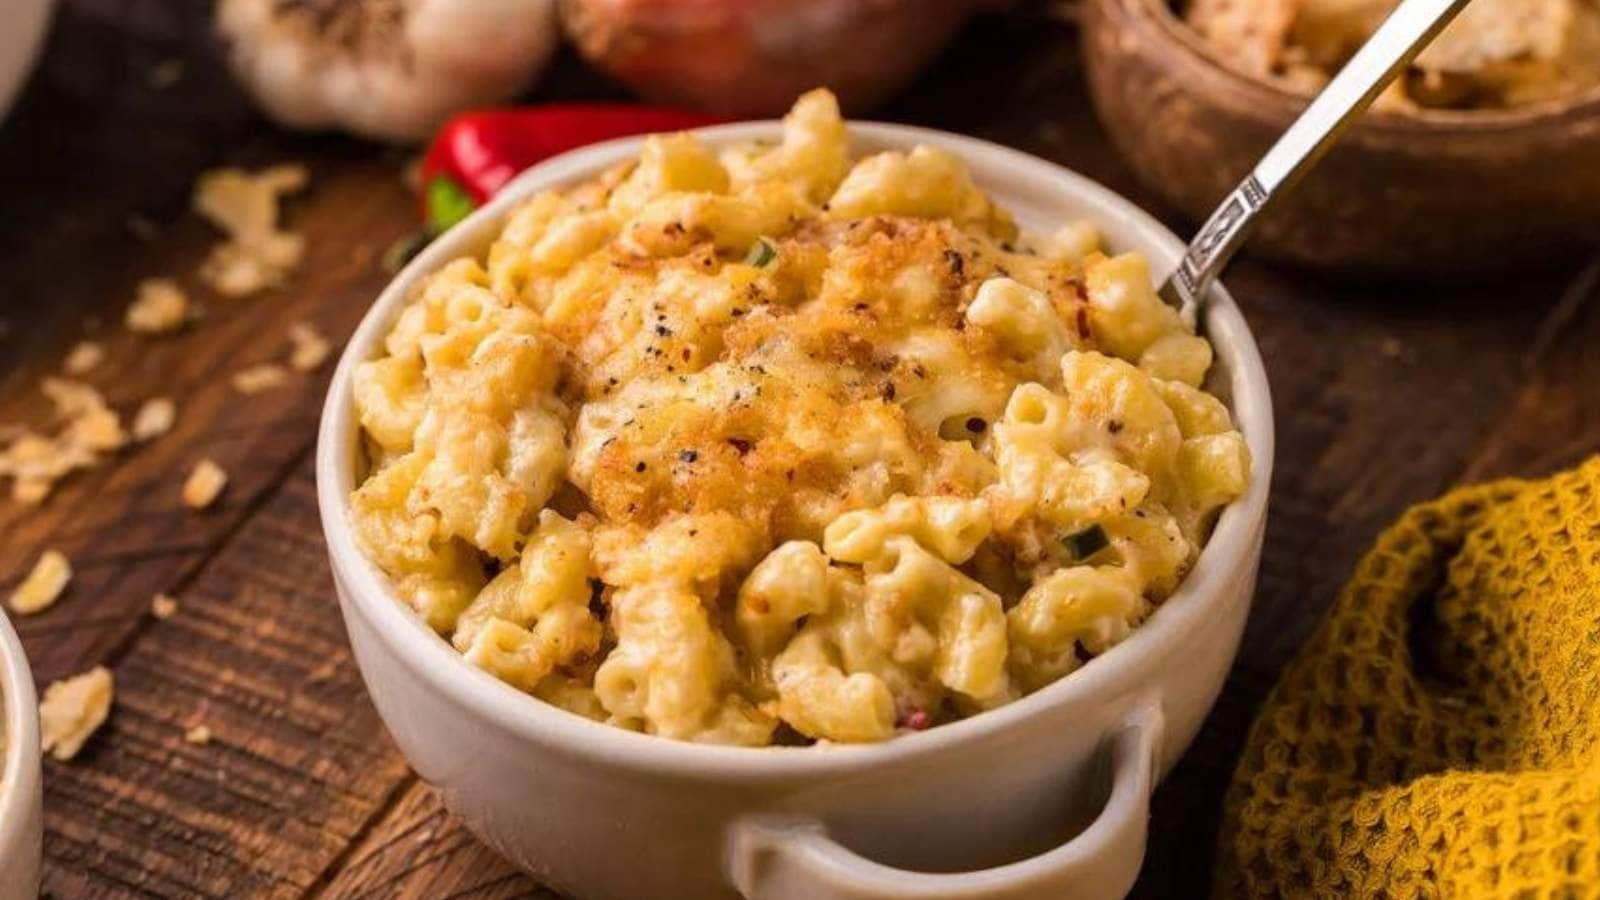 Smoked Gouda Mac and Cheese with Pancetta recipe by Xoxo Bella.